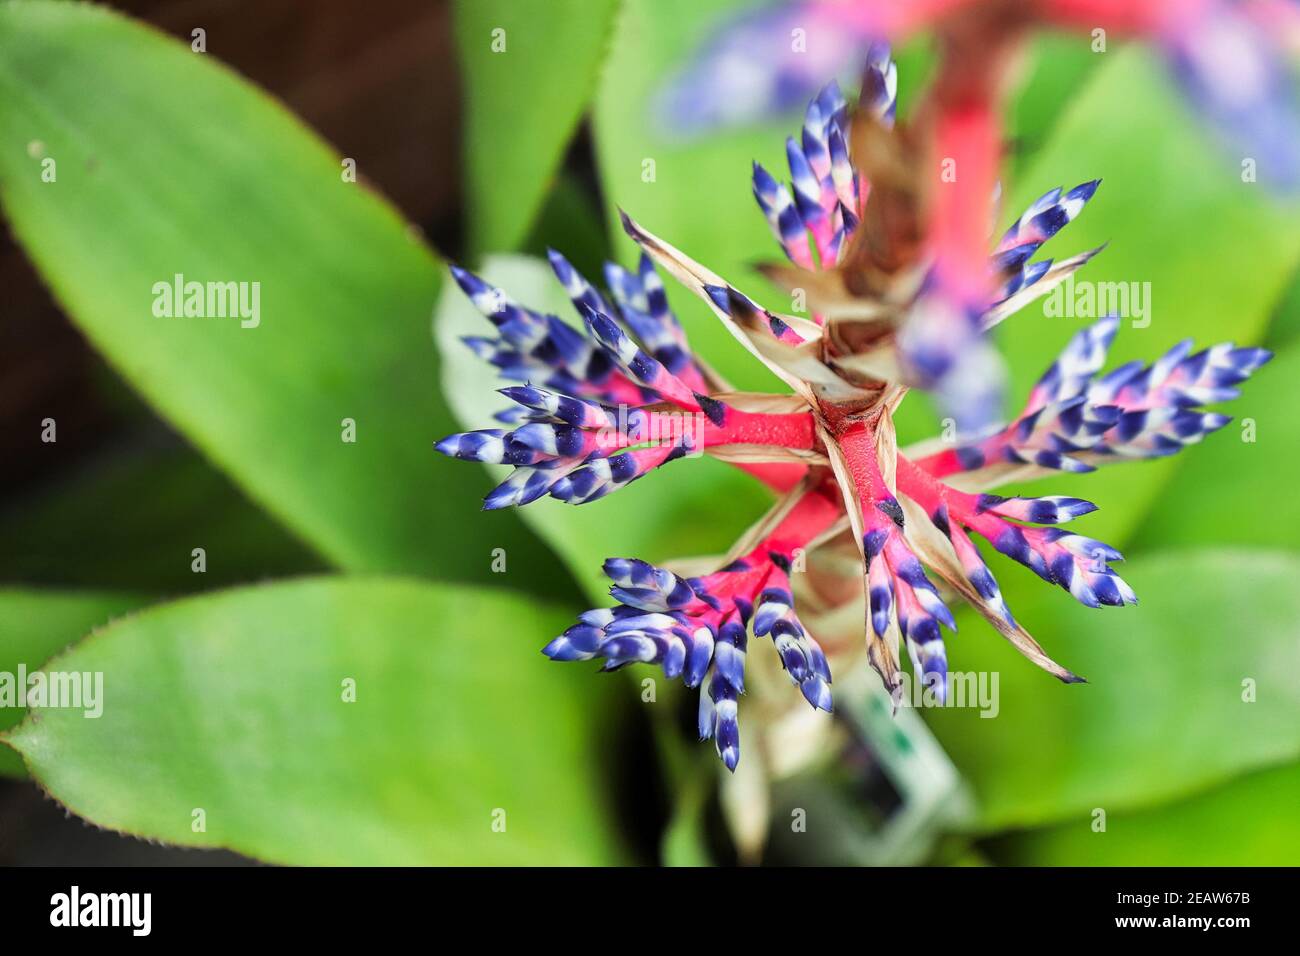 Top view of the flower spear of a del mar aechmea plant Stock Photo